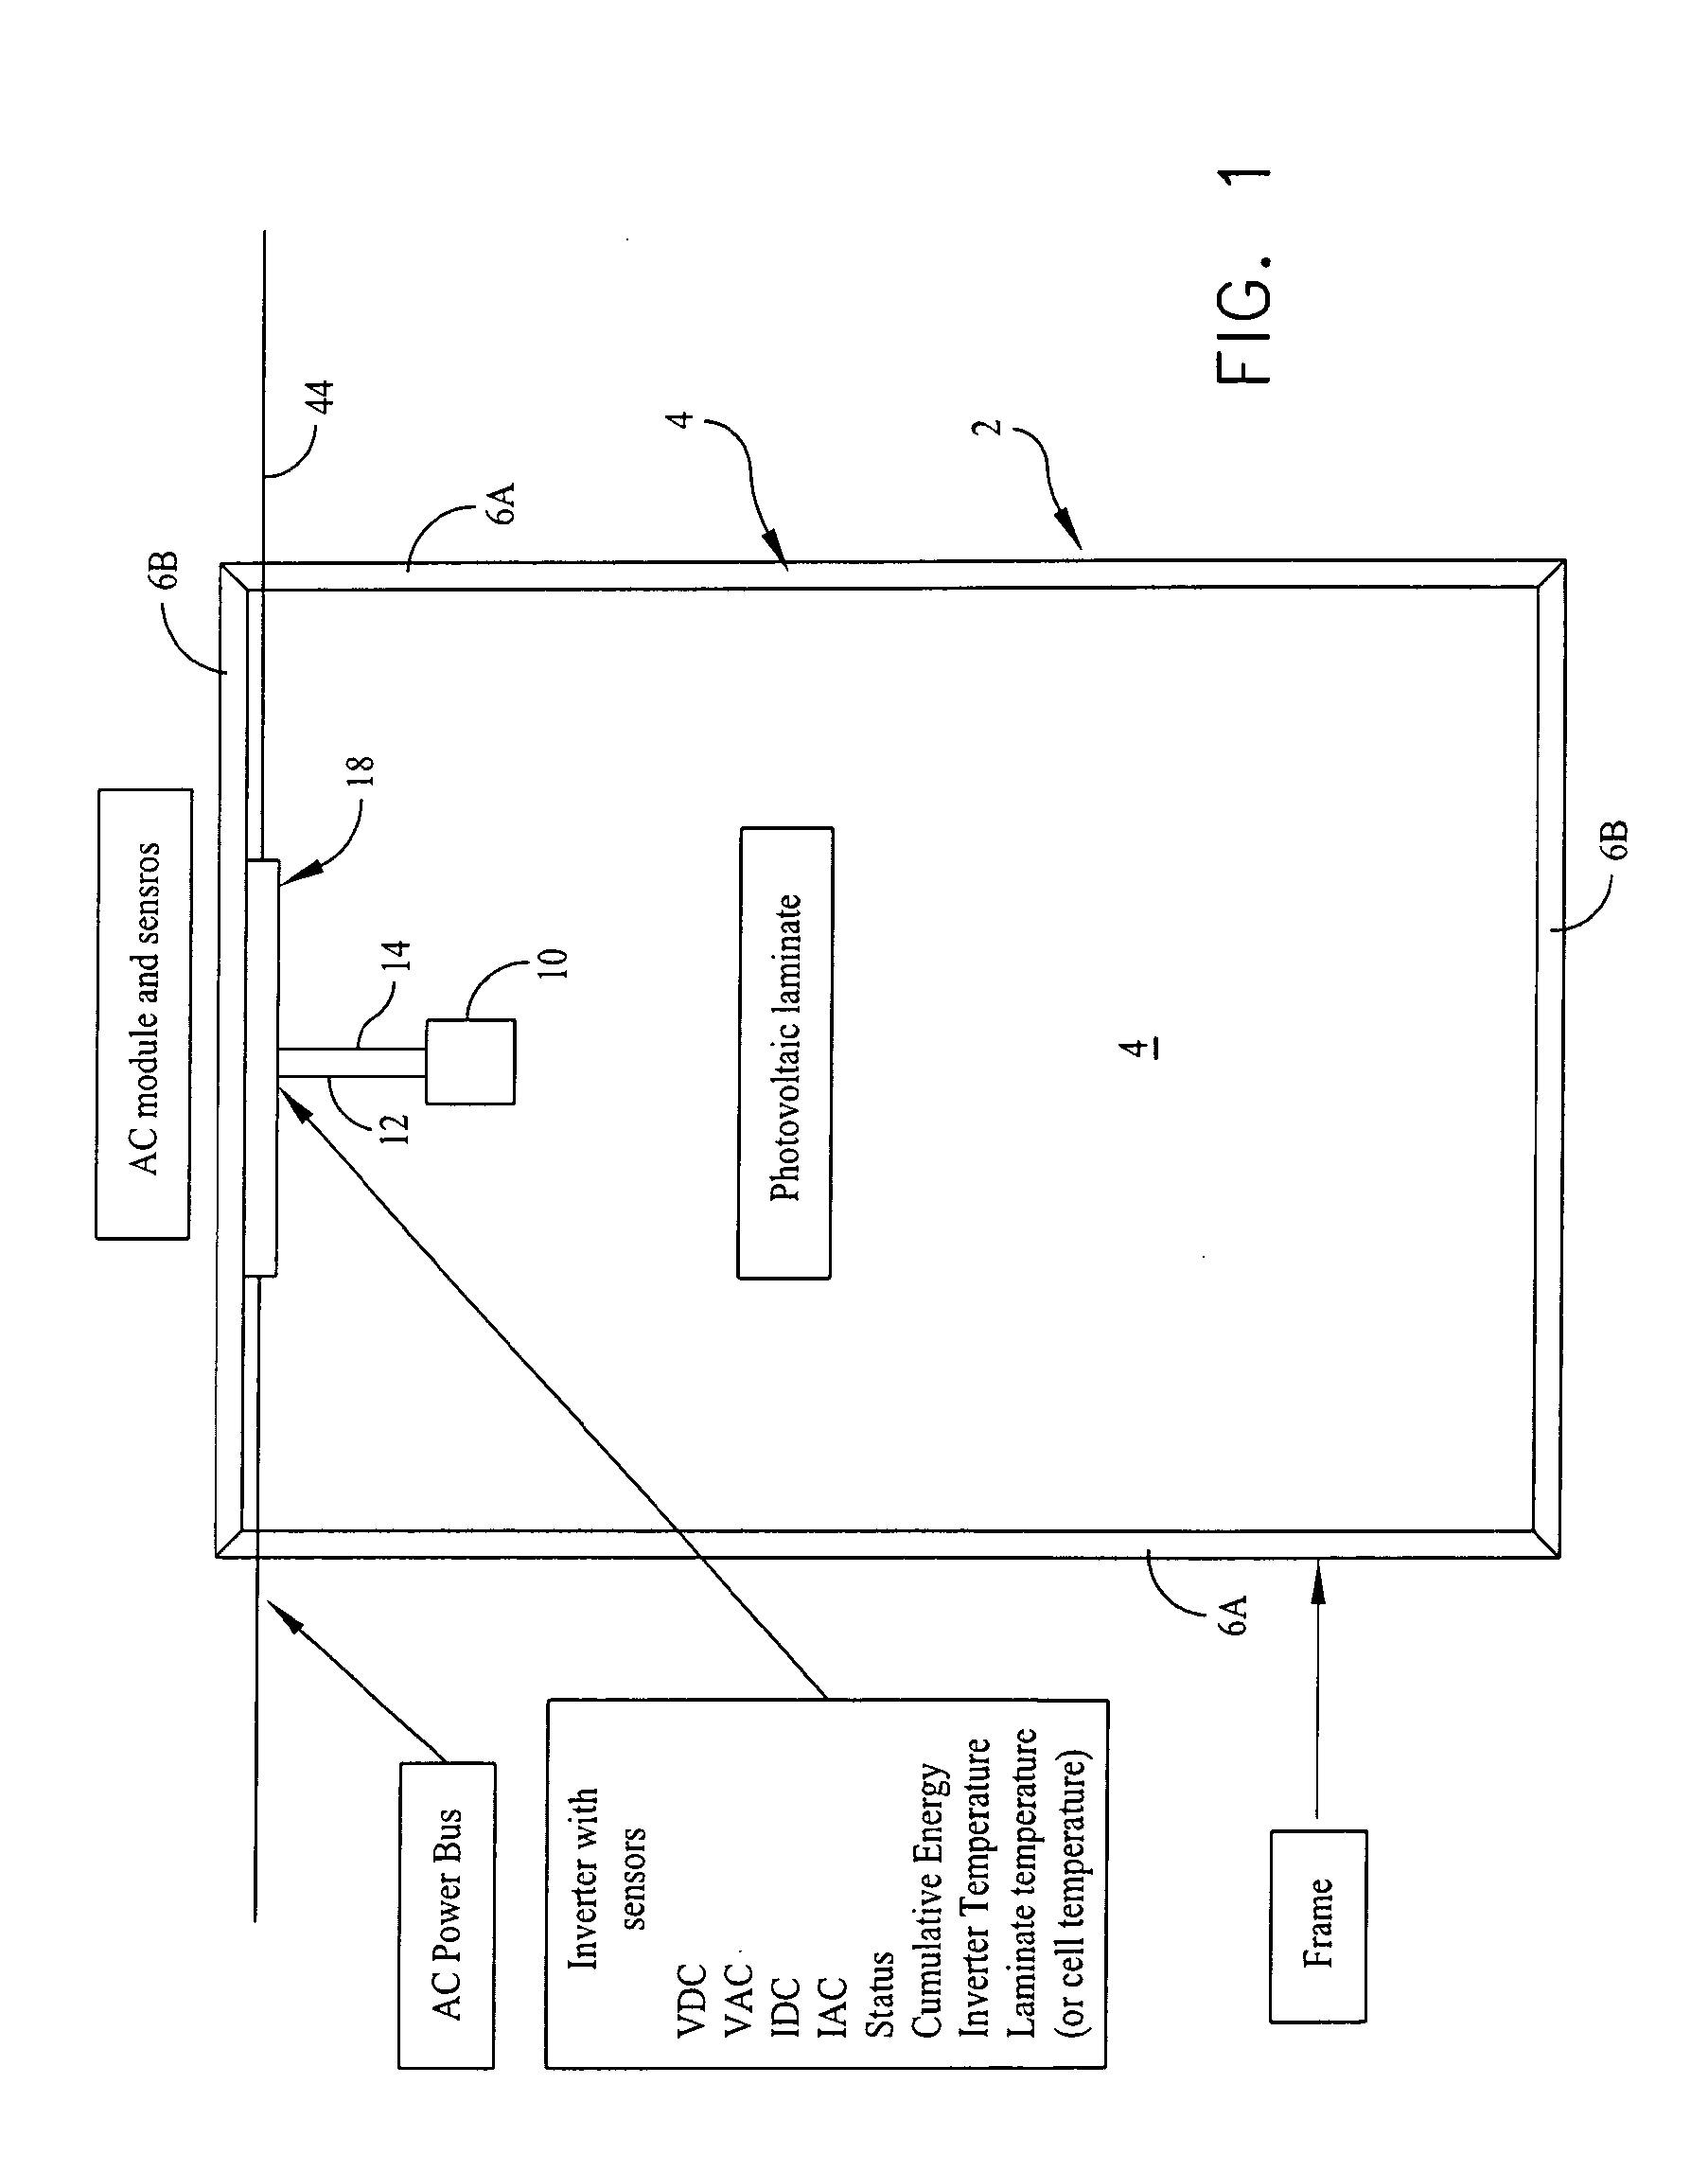 Data acquisition apparatus and methodology for self-diagnosing of AC modules